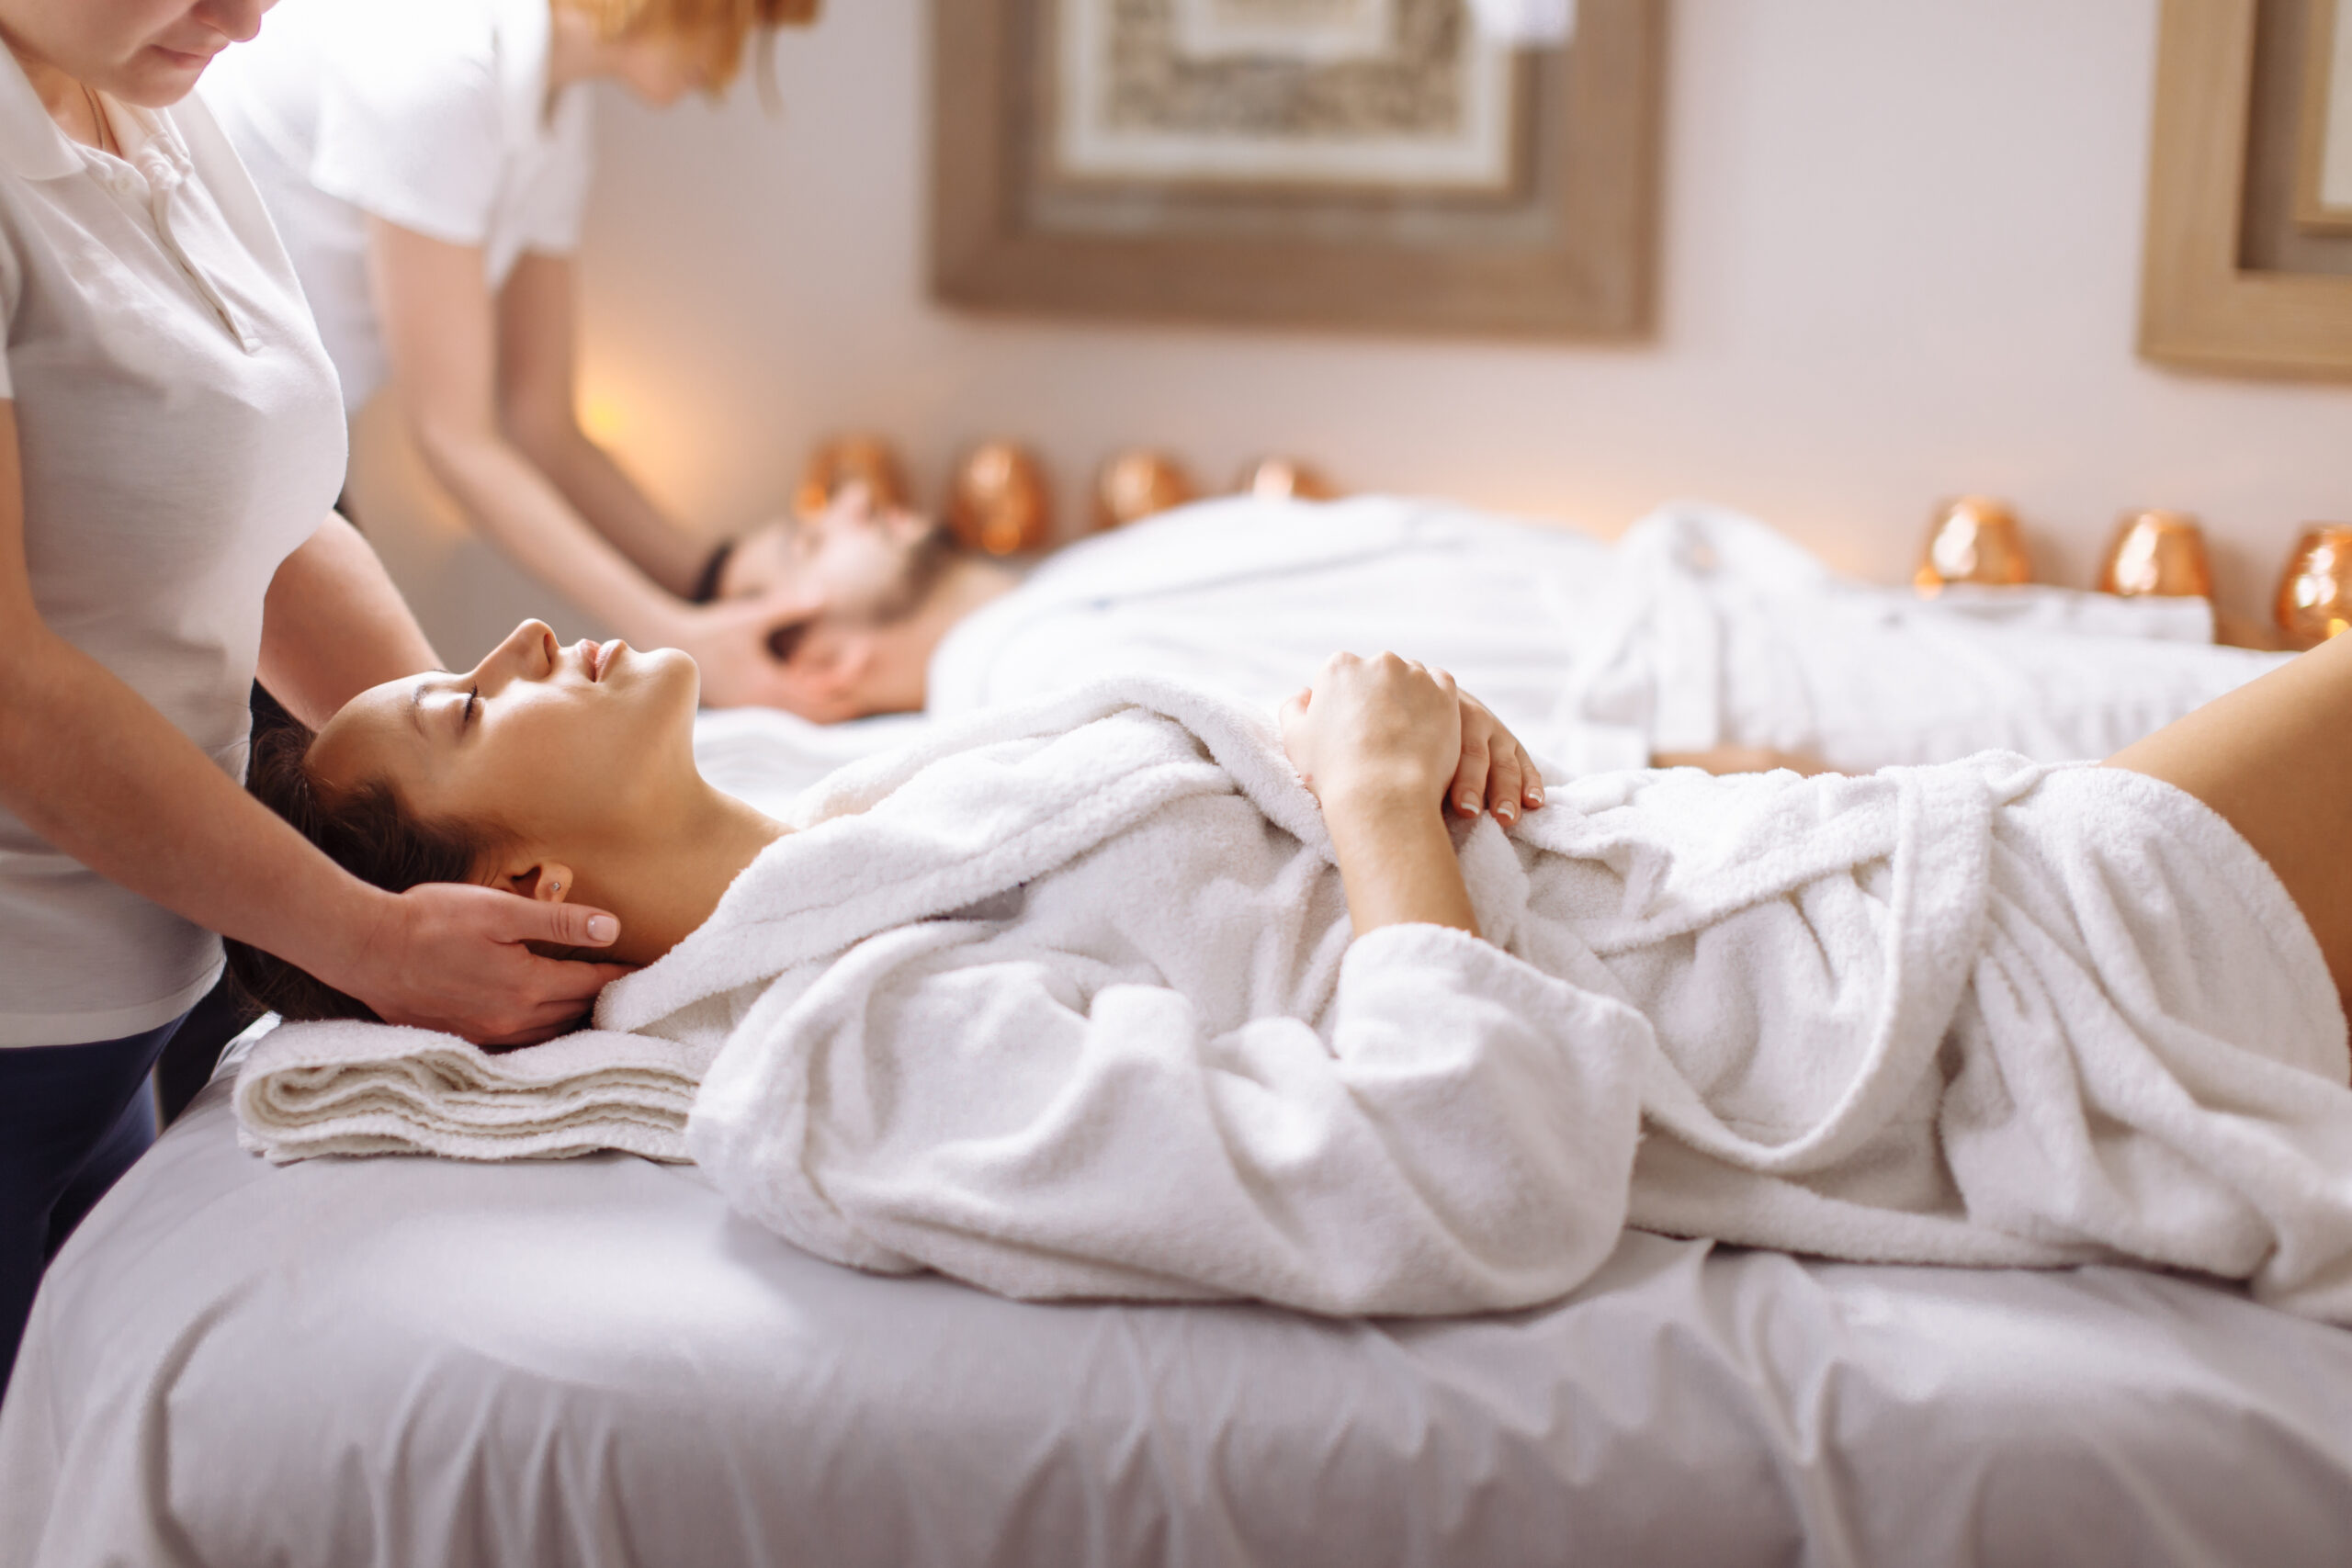 Why You Should Consider A CBD Oil Massage